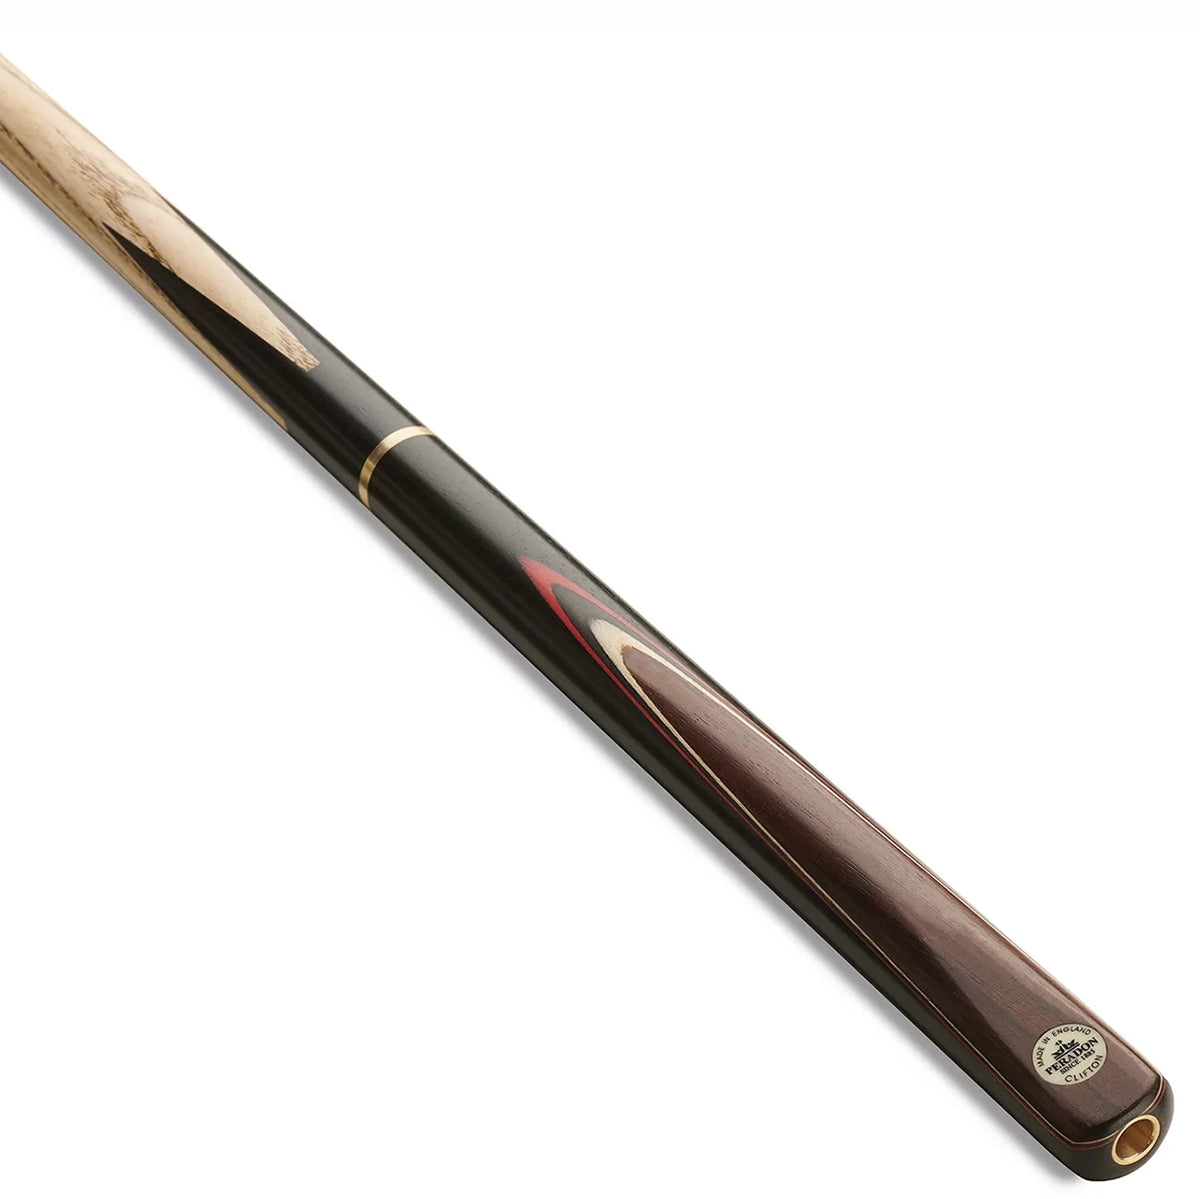 Peradon Clifton 3/4 Jointed Snooker Cue. On angle view